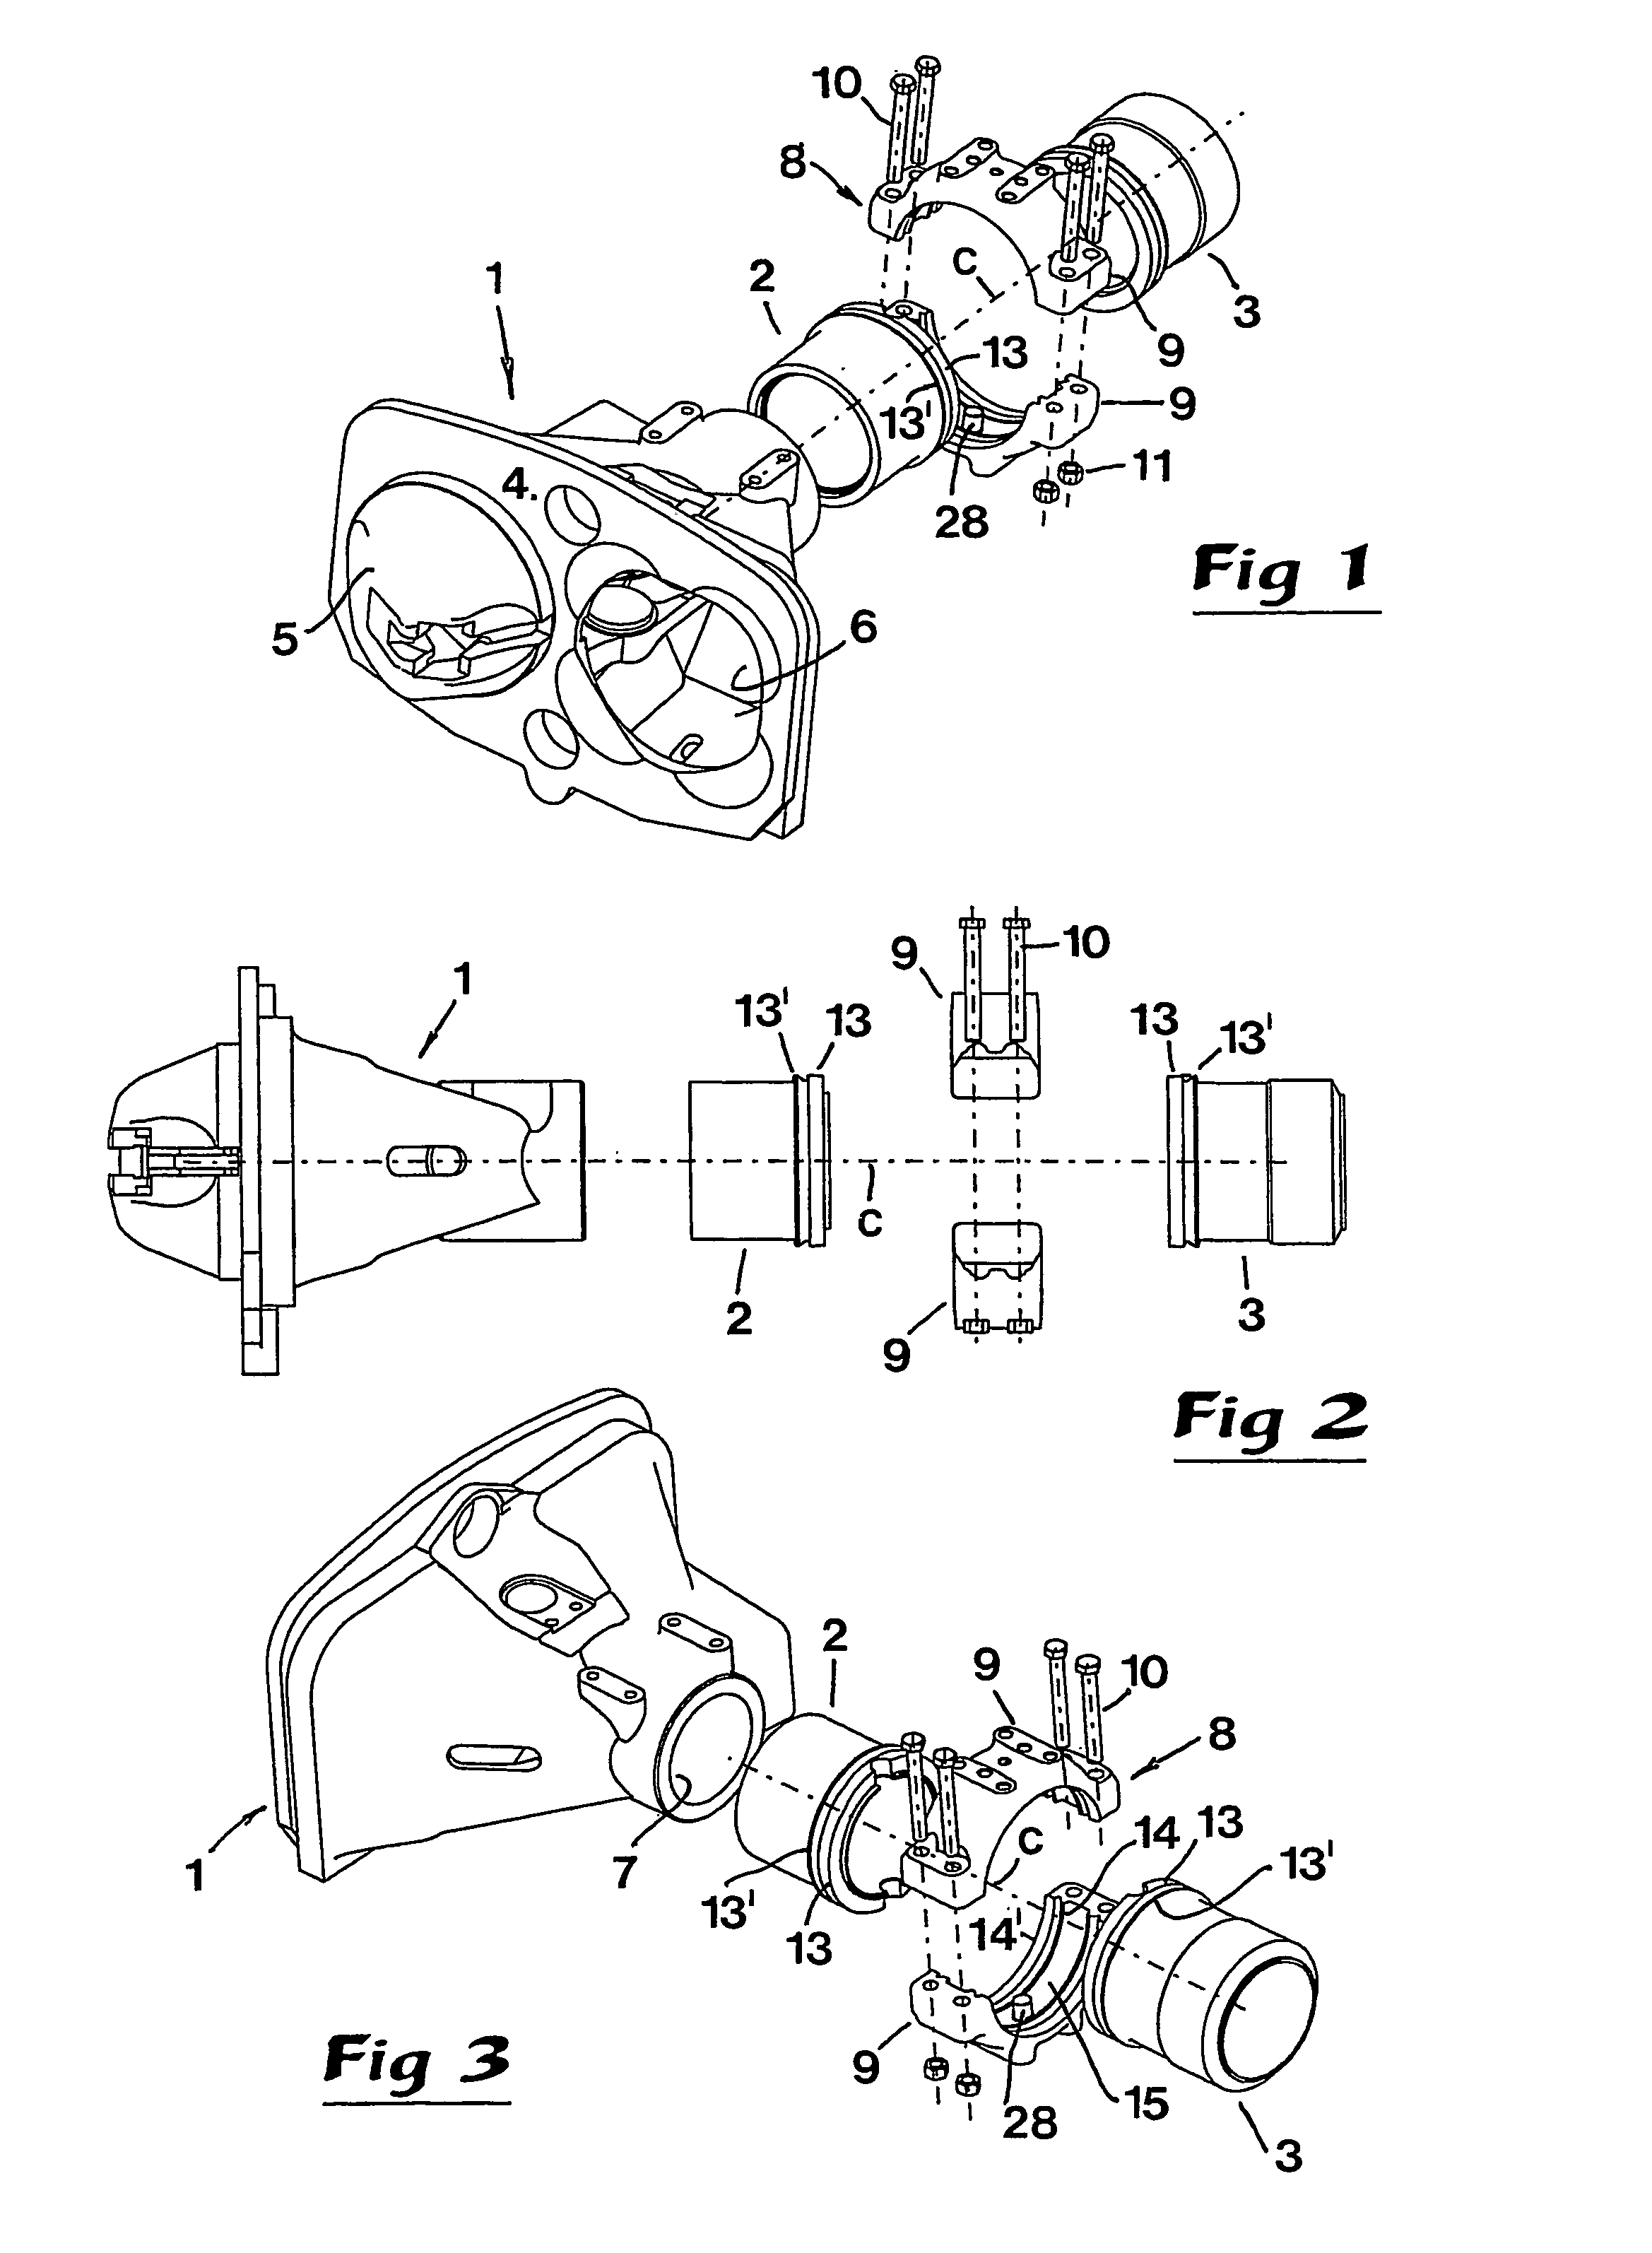 Muff coupling for vehicle couplers